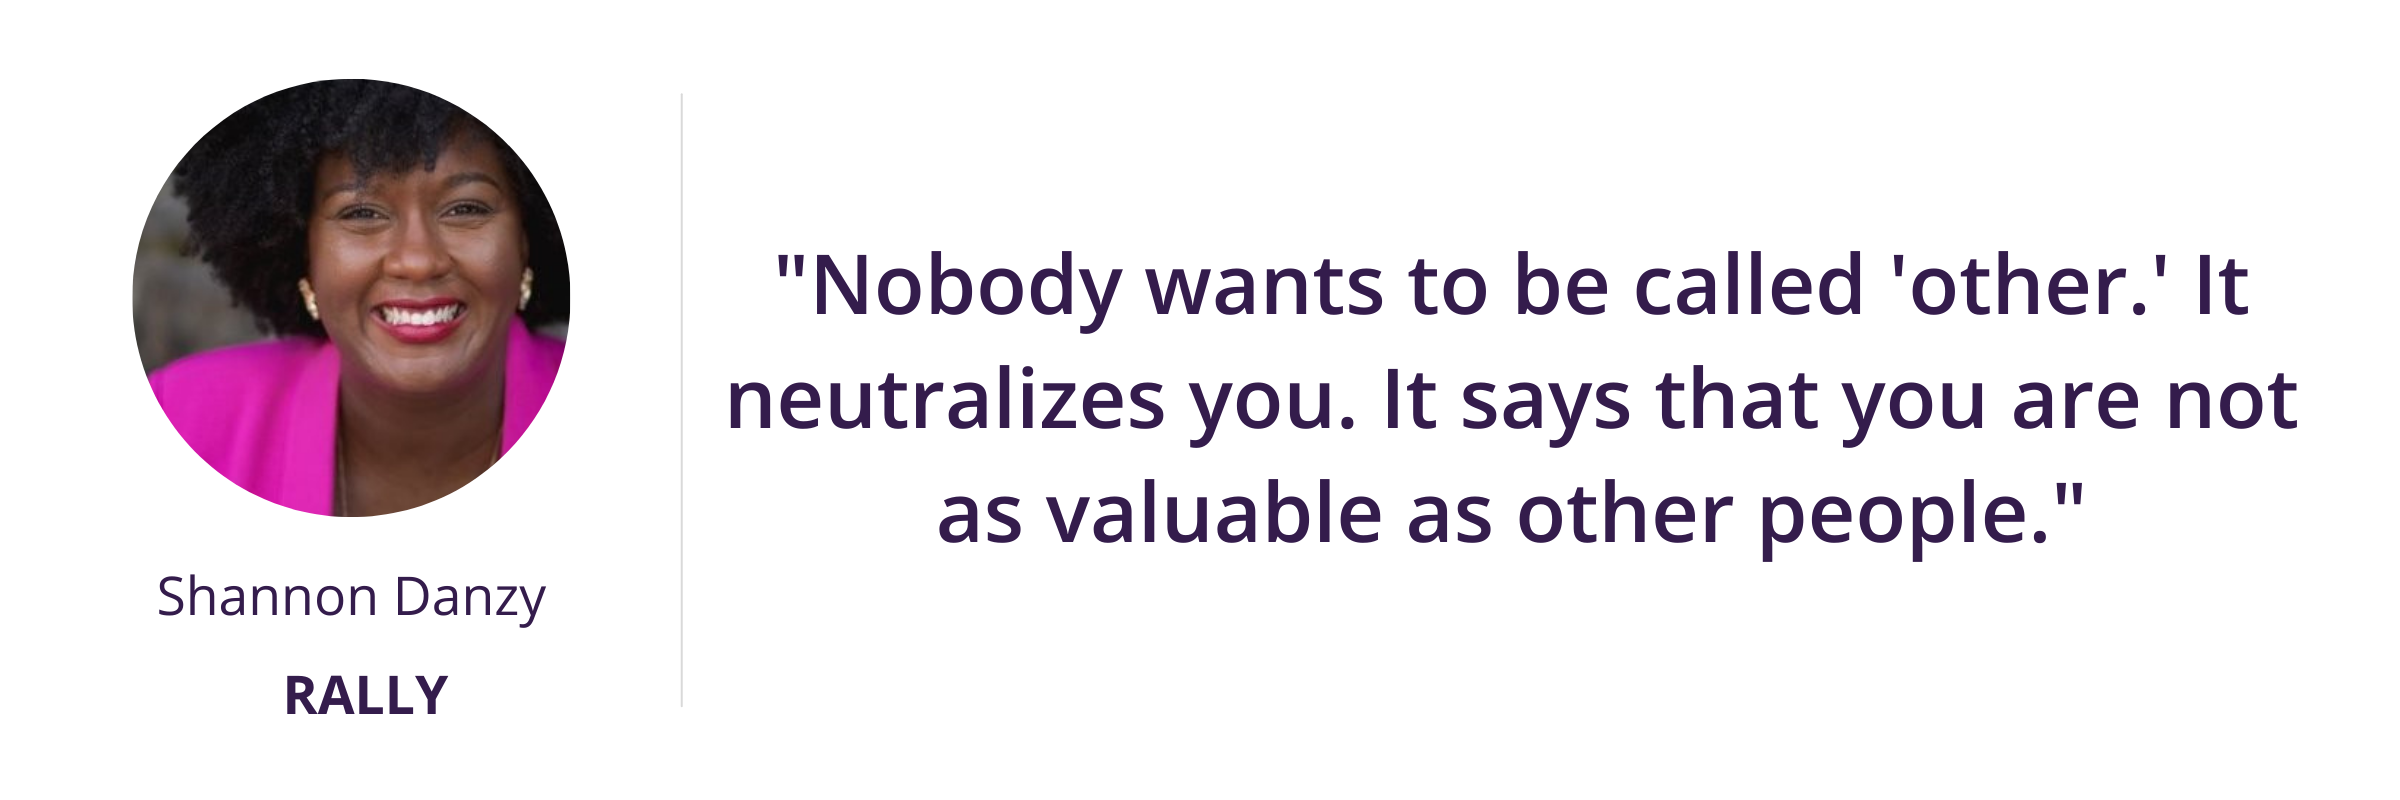 "Nobody wants to be called 'other.' It neutralizes you. It says that you are not as valuable as other people."